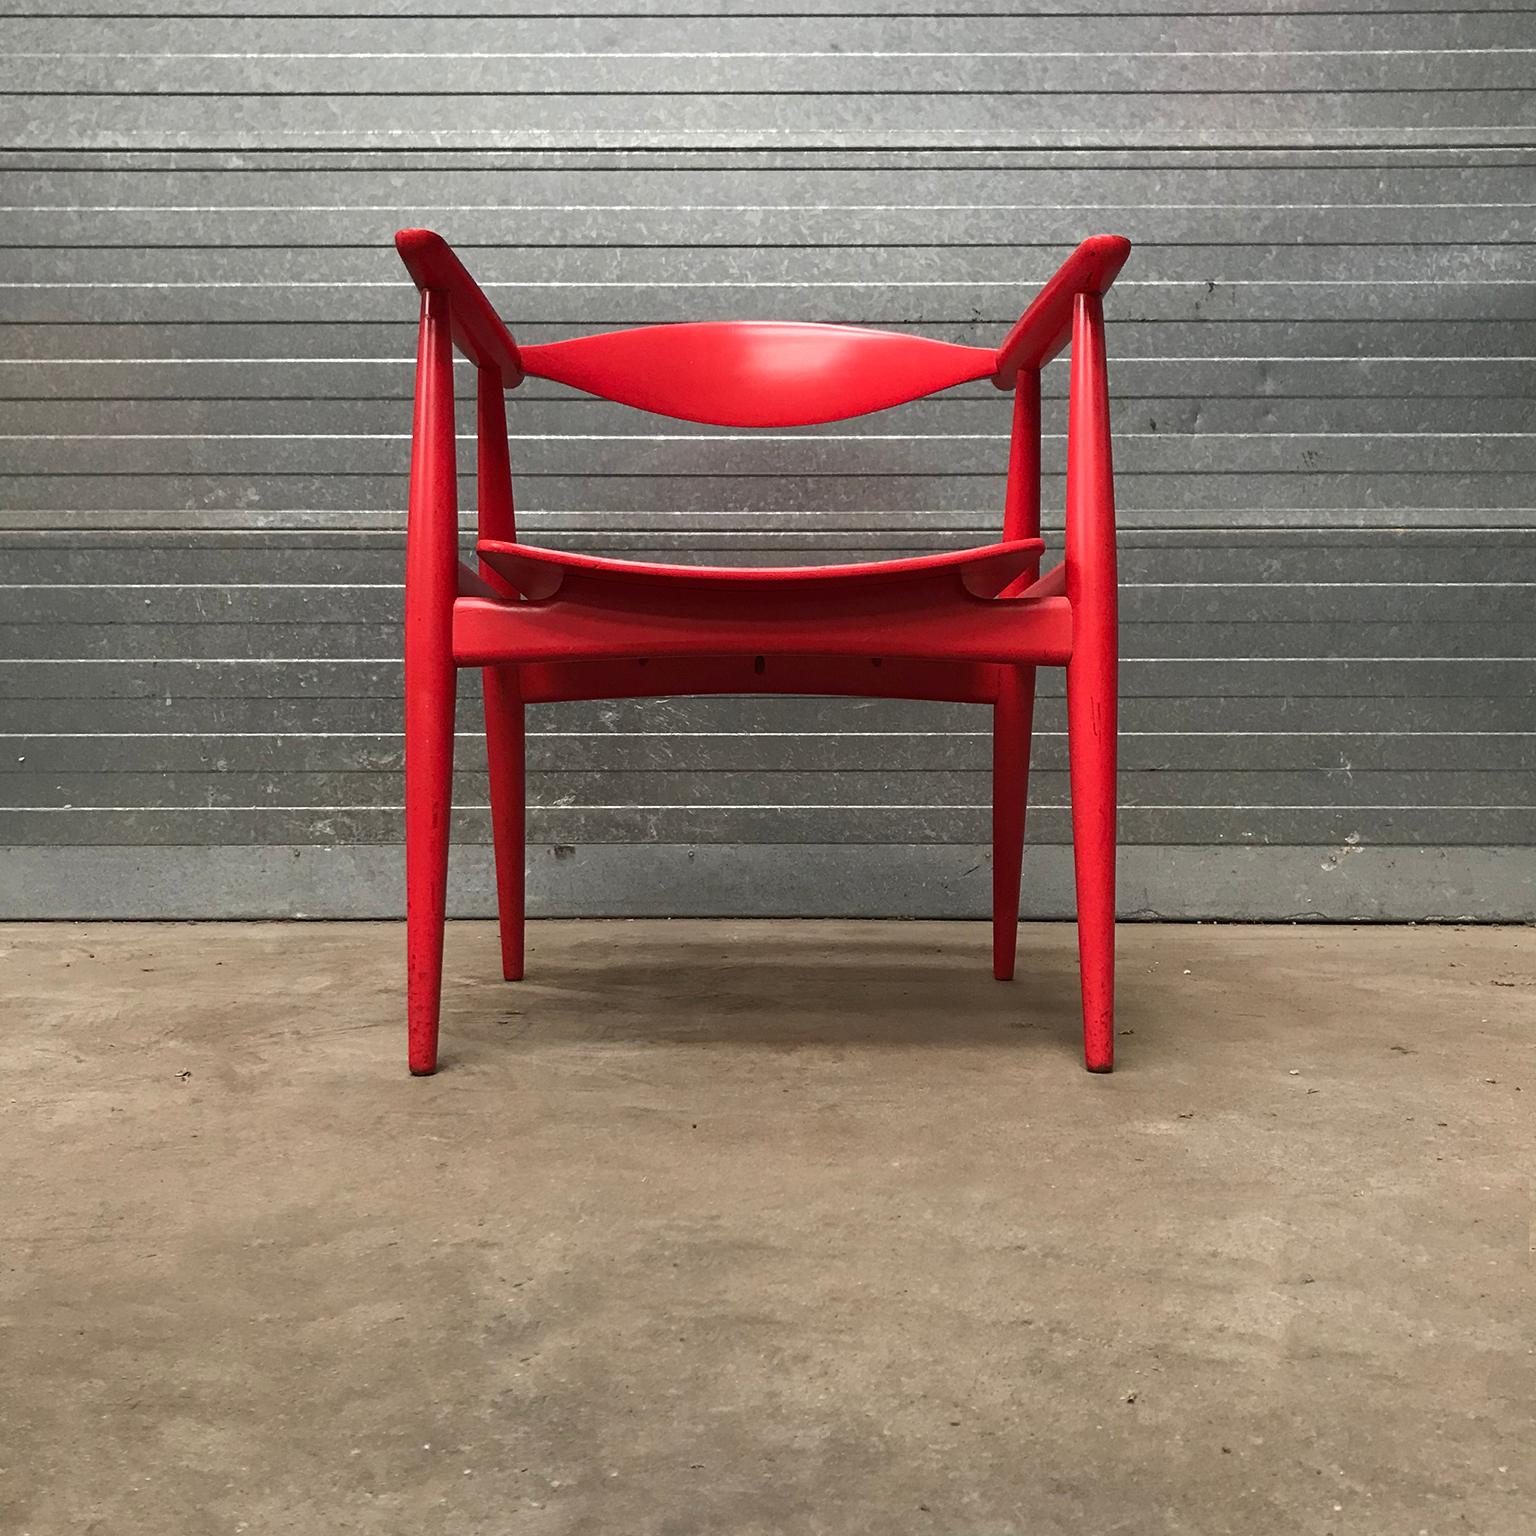 Very Rare Wegner Side Chair in Originally Red Painted Wood, circa 1930 For Sale 5